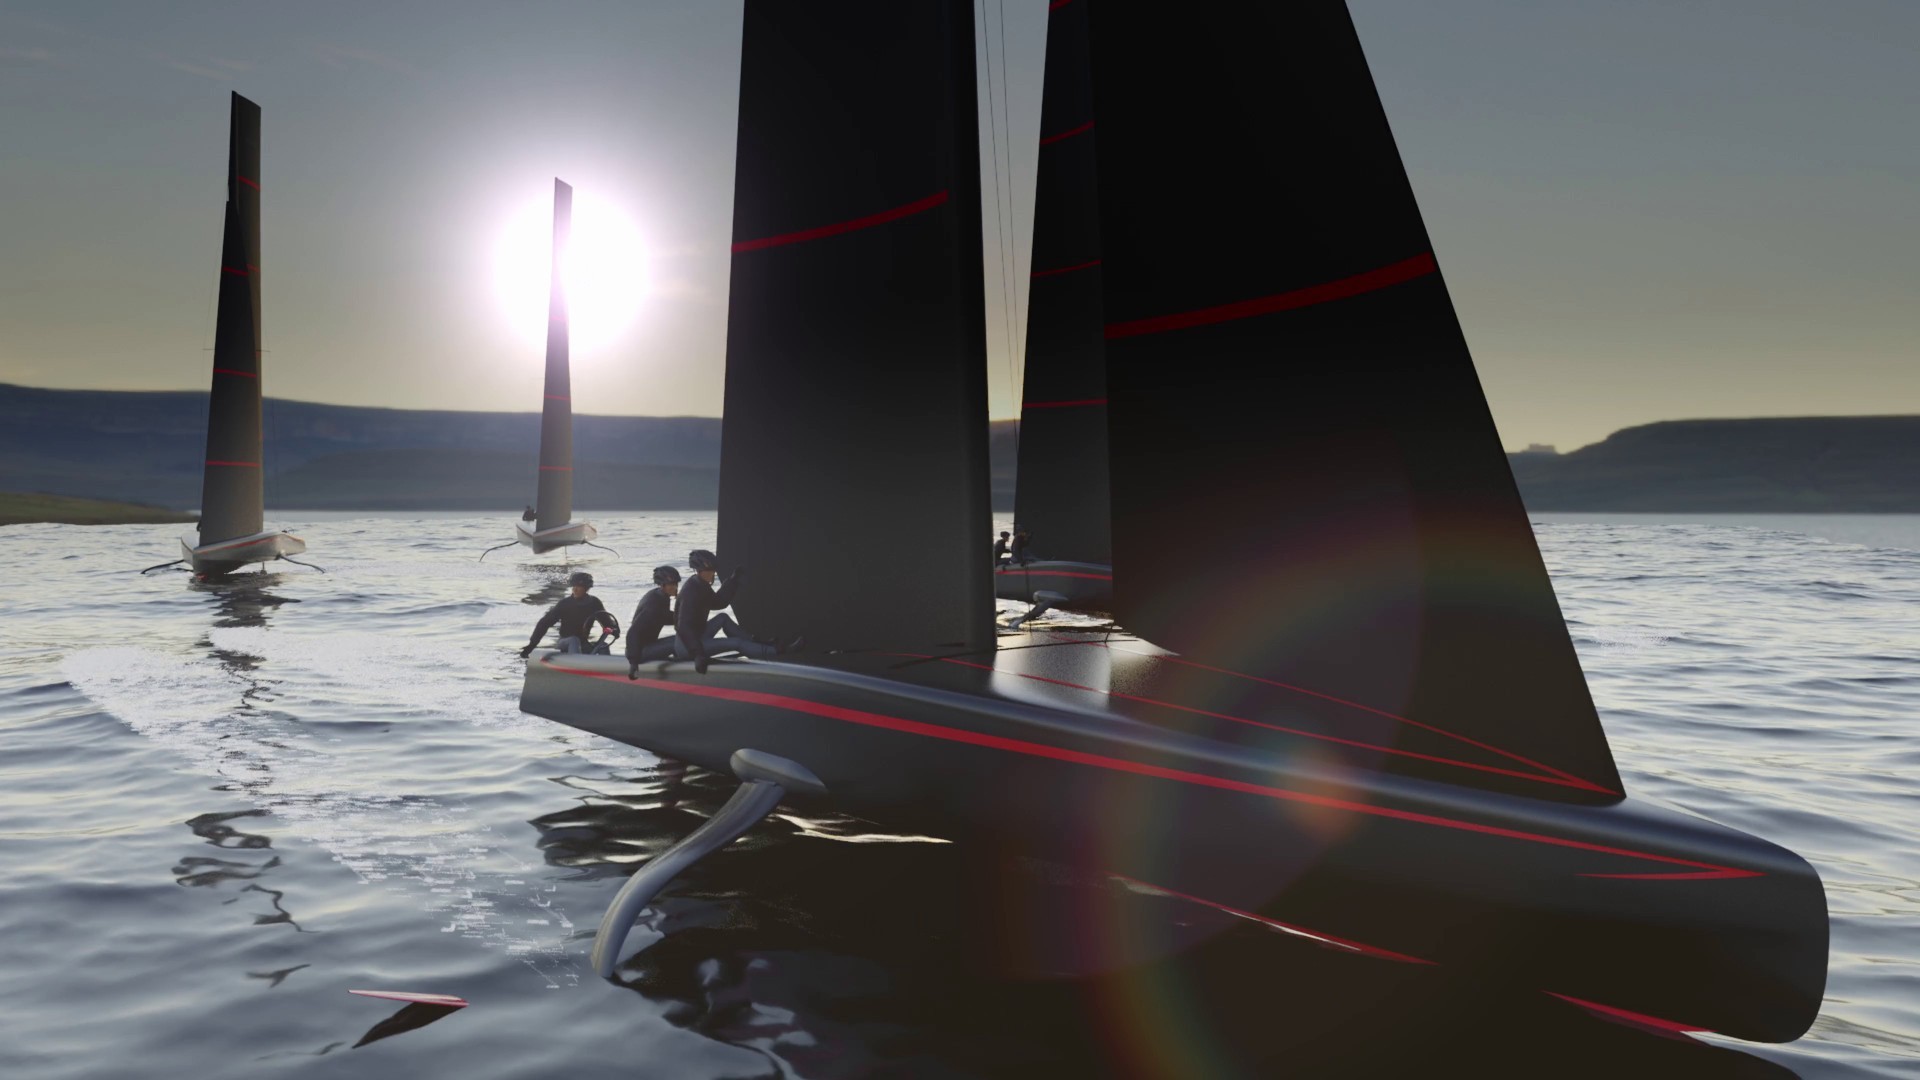 The Persico Fly40 is a 12-metre foiling monohull concept developed directly from the AC75s and due to go into production before the end of this year. Persico Marine plans to run the class itself as a tightly managed one design racing circuit for owner-drivers with professional crews